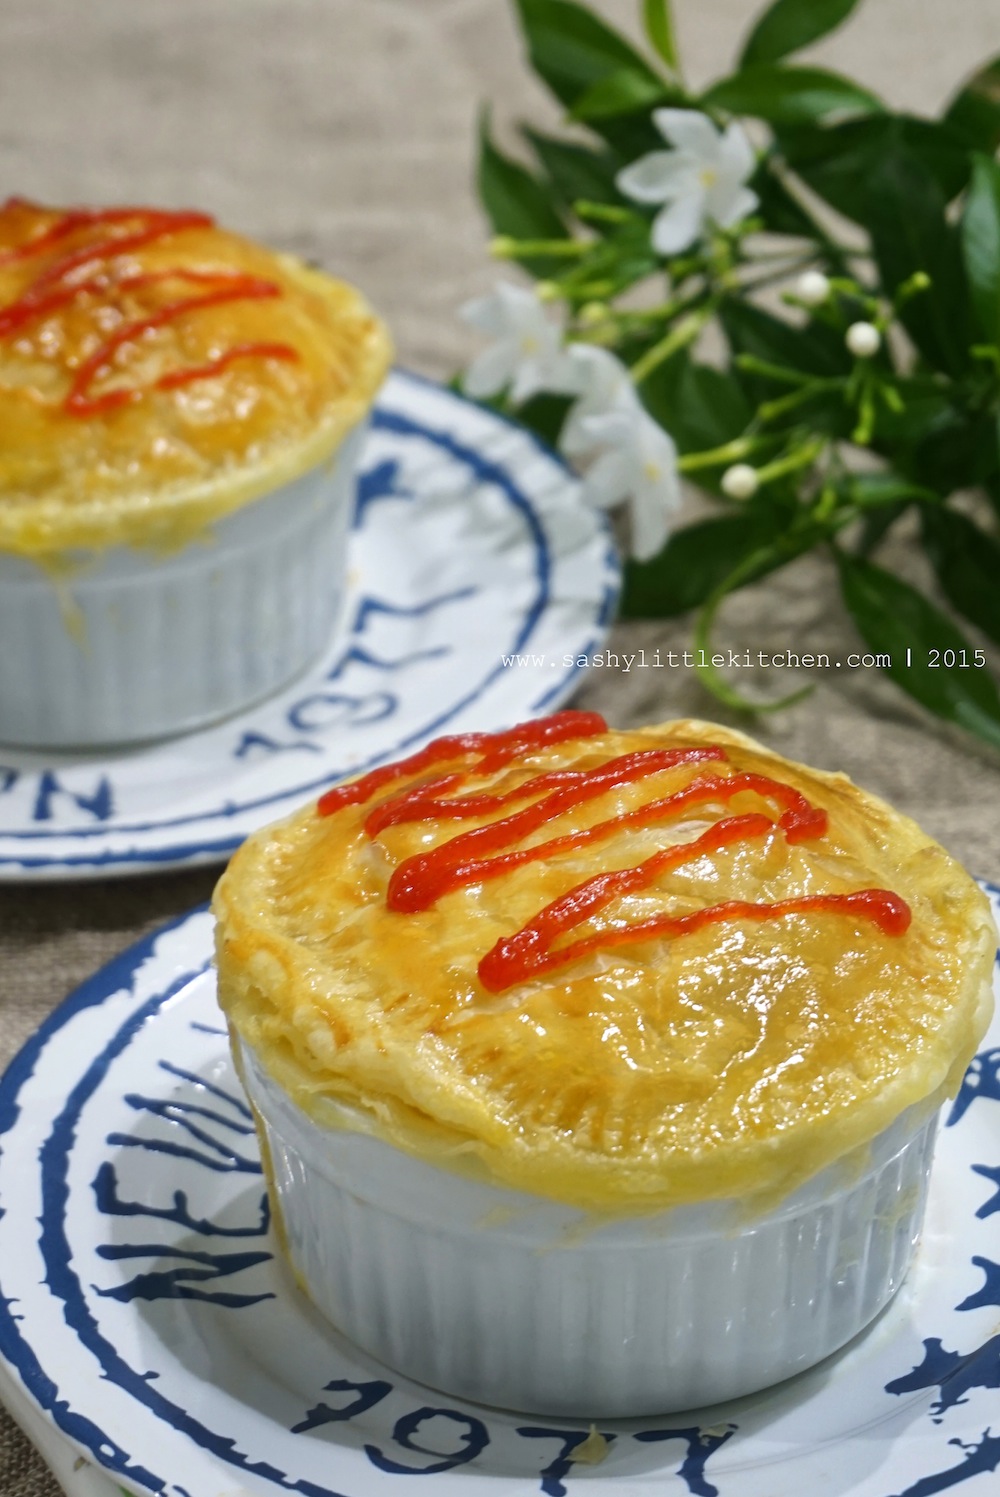 Resep Zuppa Soup ( Pastry isi Krim Sup) - Bali Food 